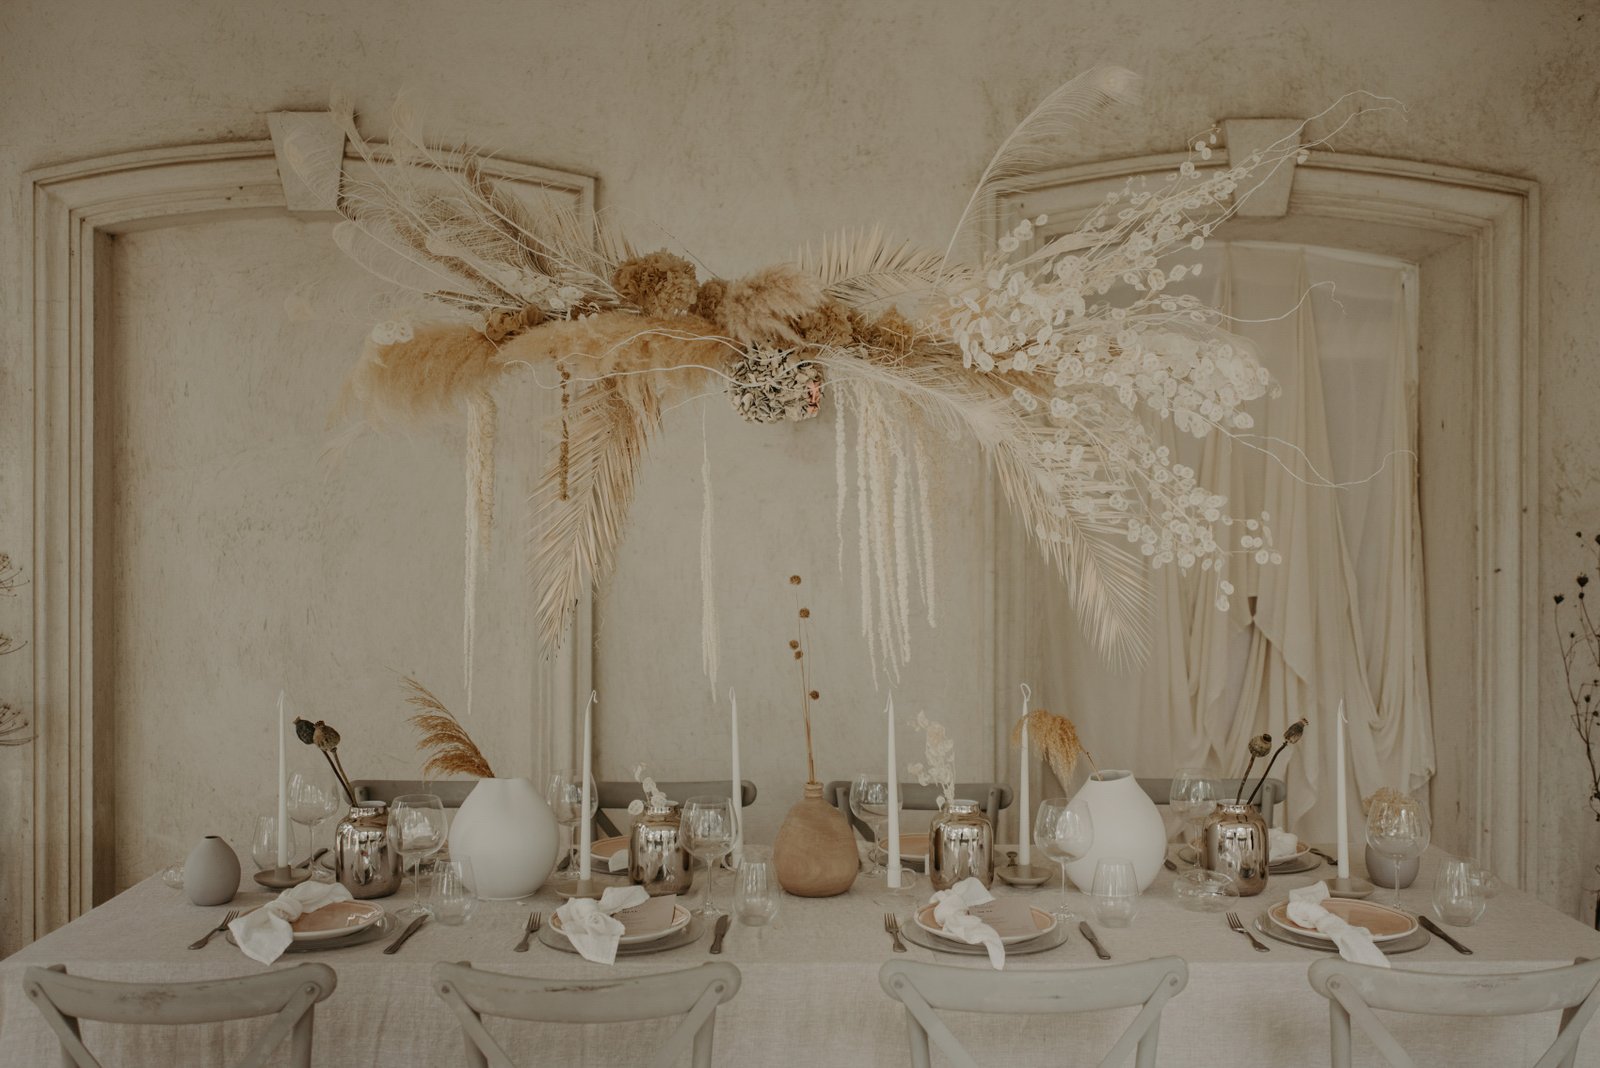 Two Brides Ethereal Wedding Inspiration Eco table